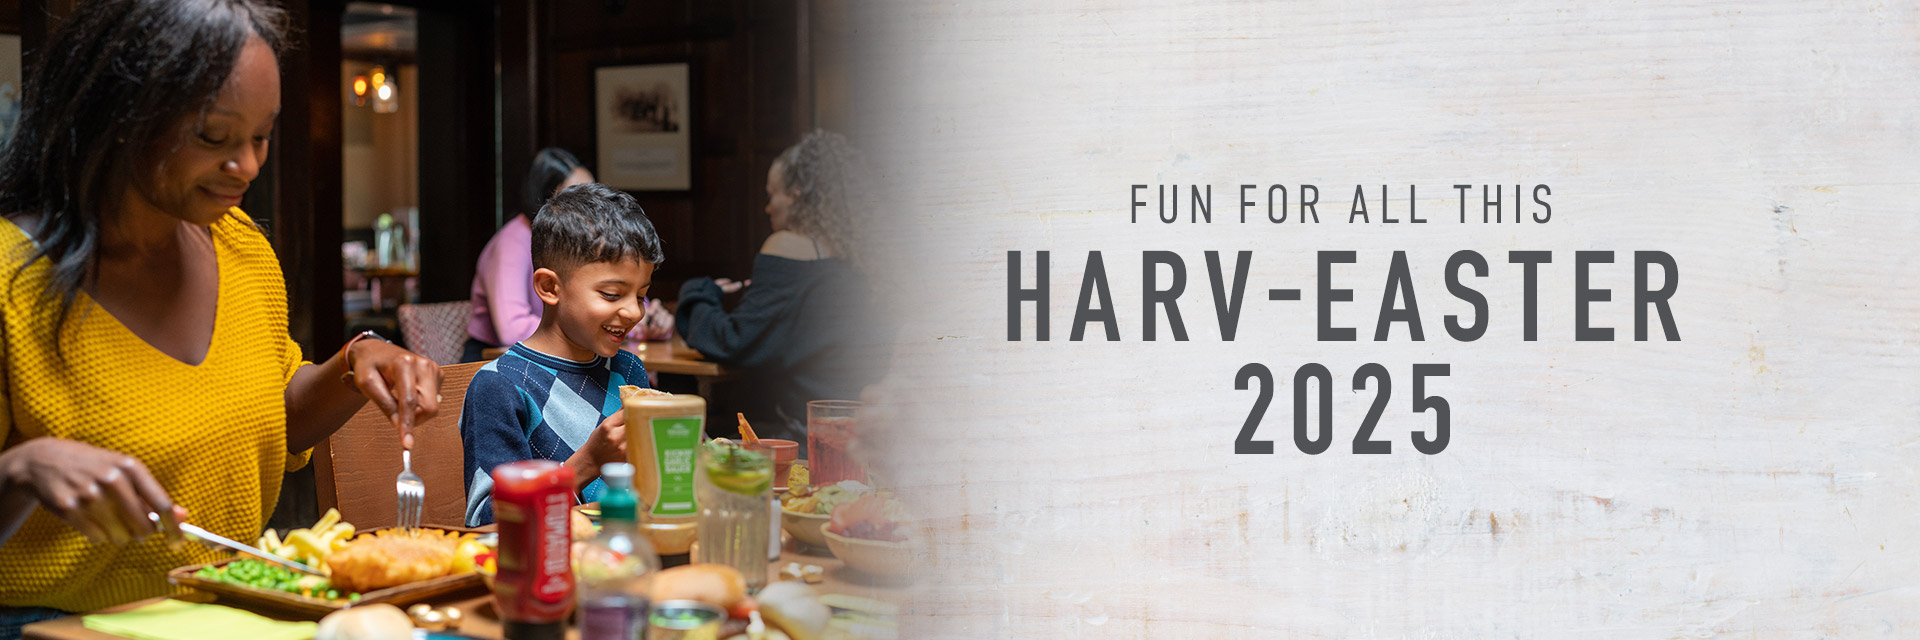 Easter at Harvester Boldmere in Sutton Coldfield 2025